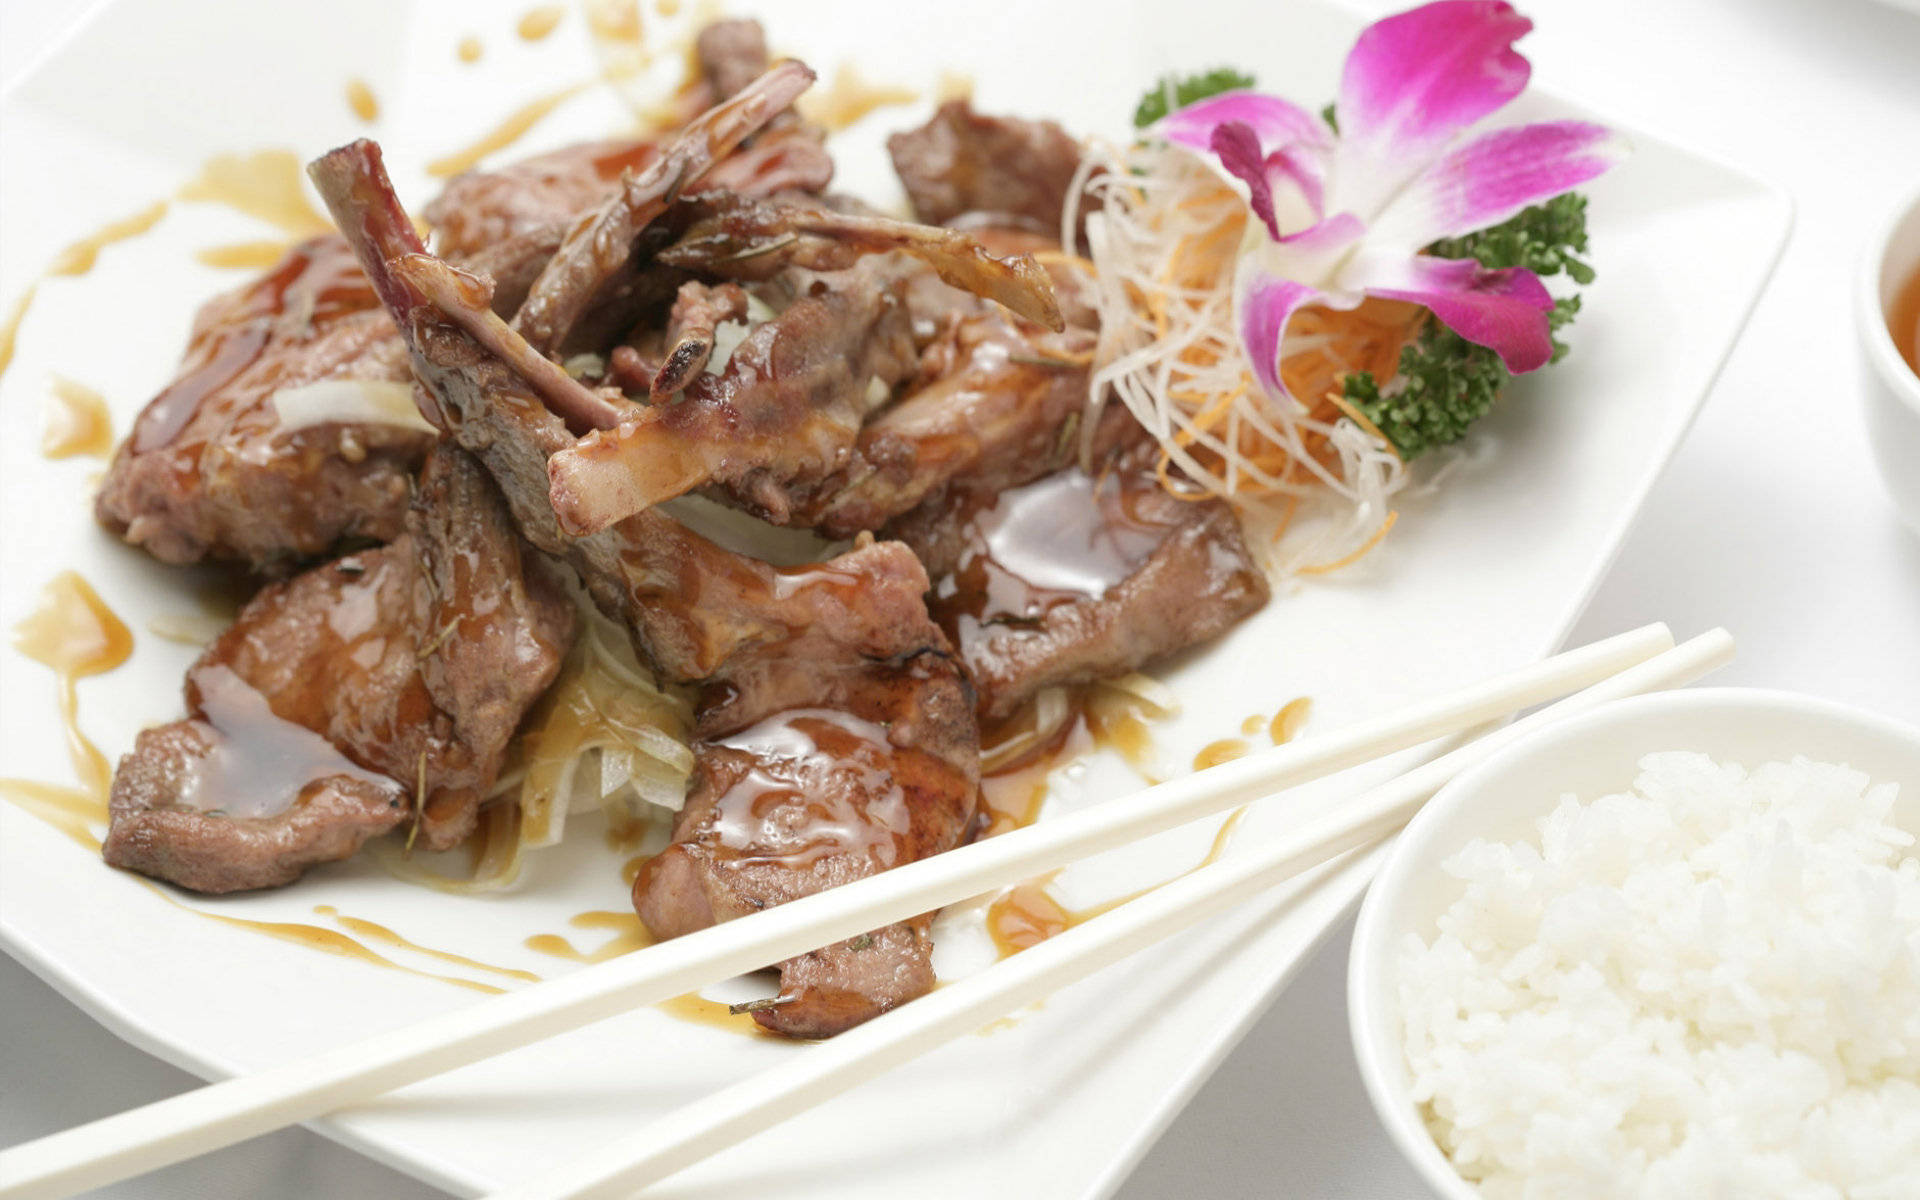 Exquisite Quail Steak with Side Dish Wallpaper